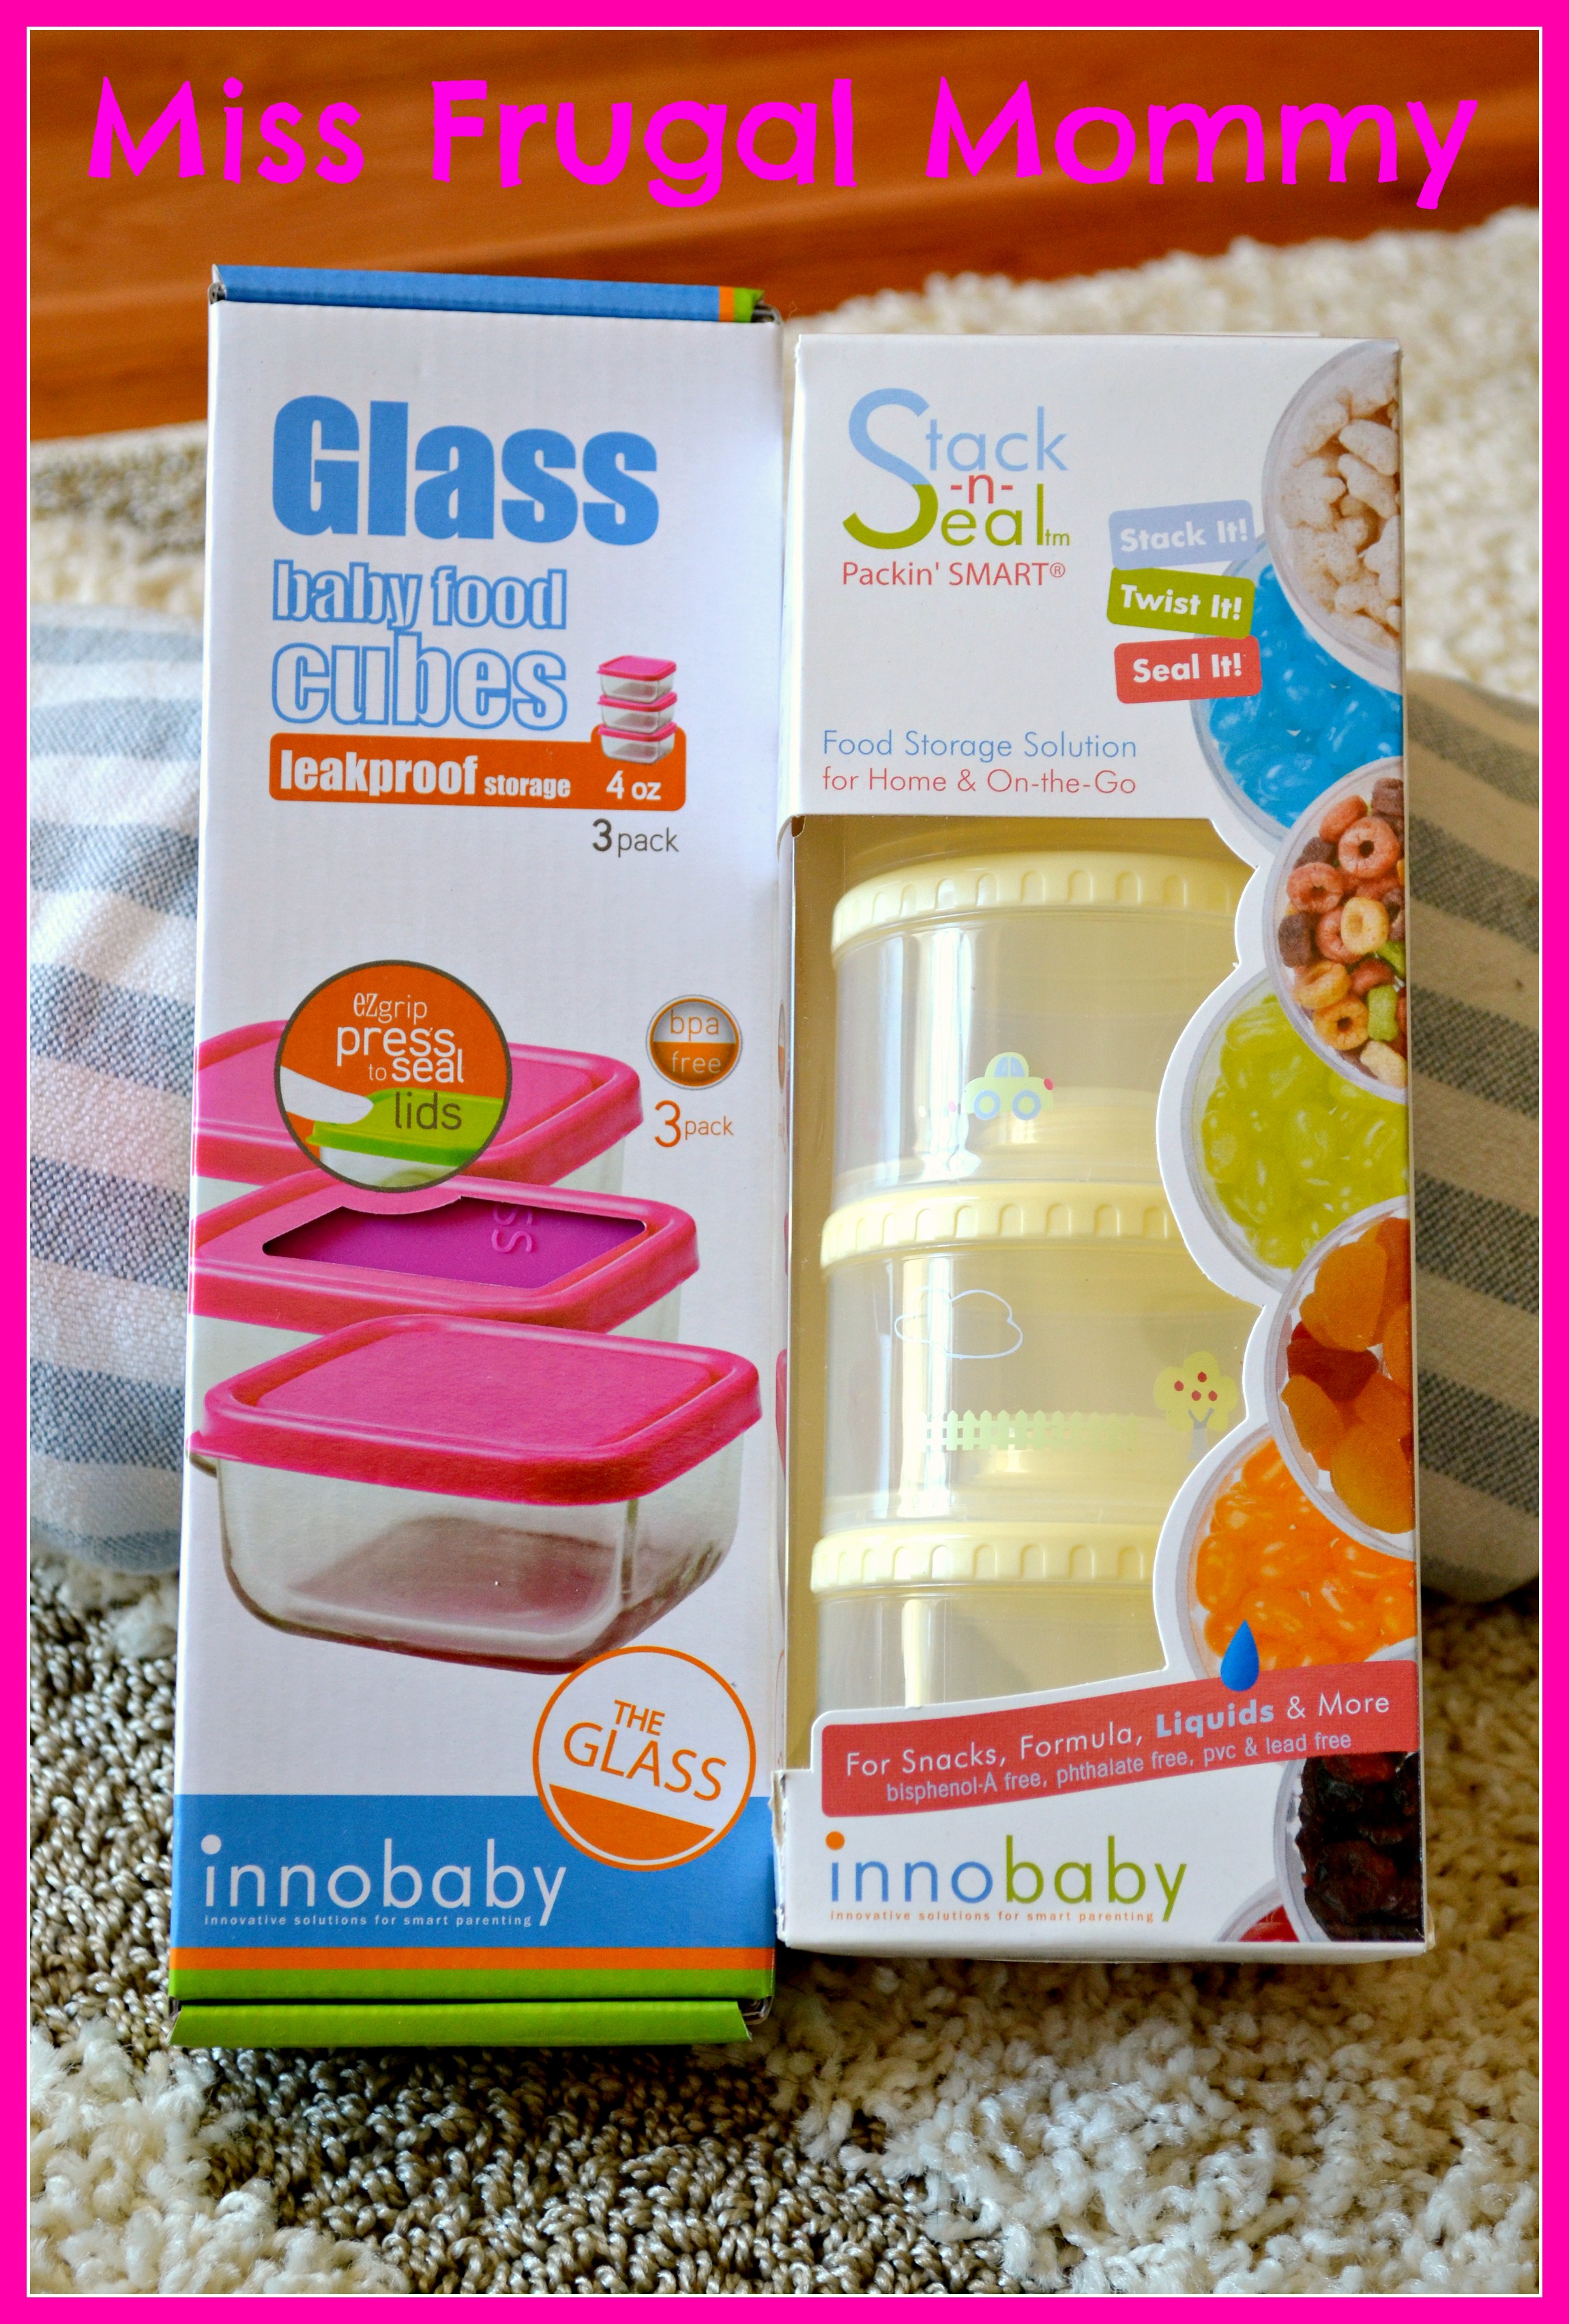 innobaby Review (Getting Ready For Baby Gift Guide)